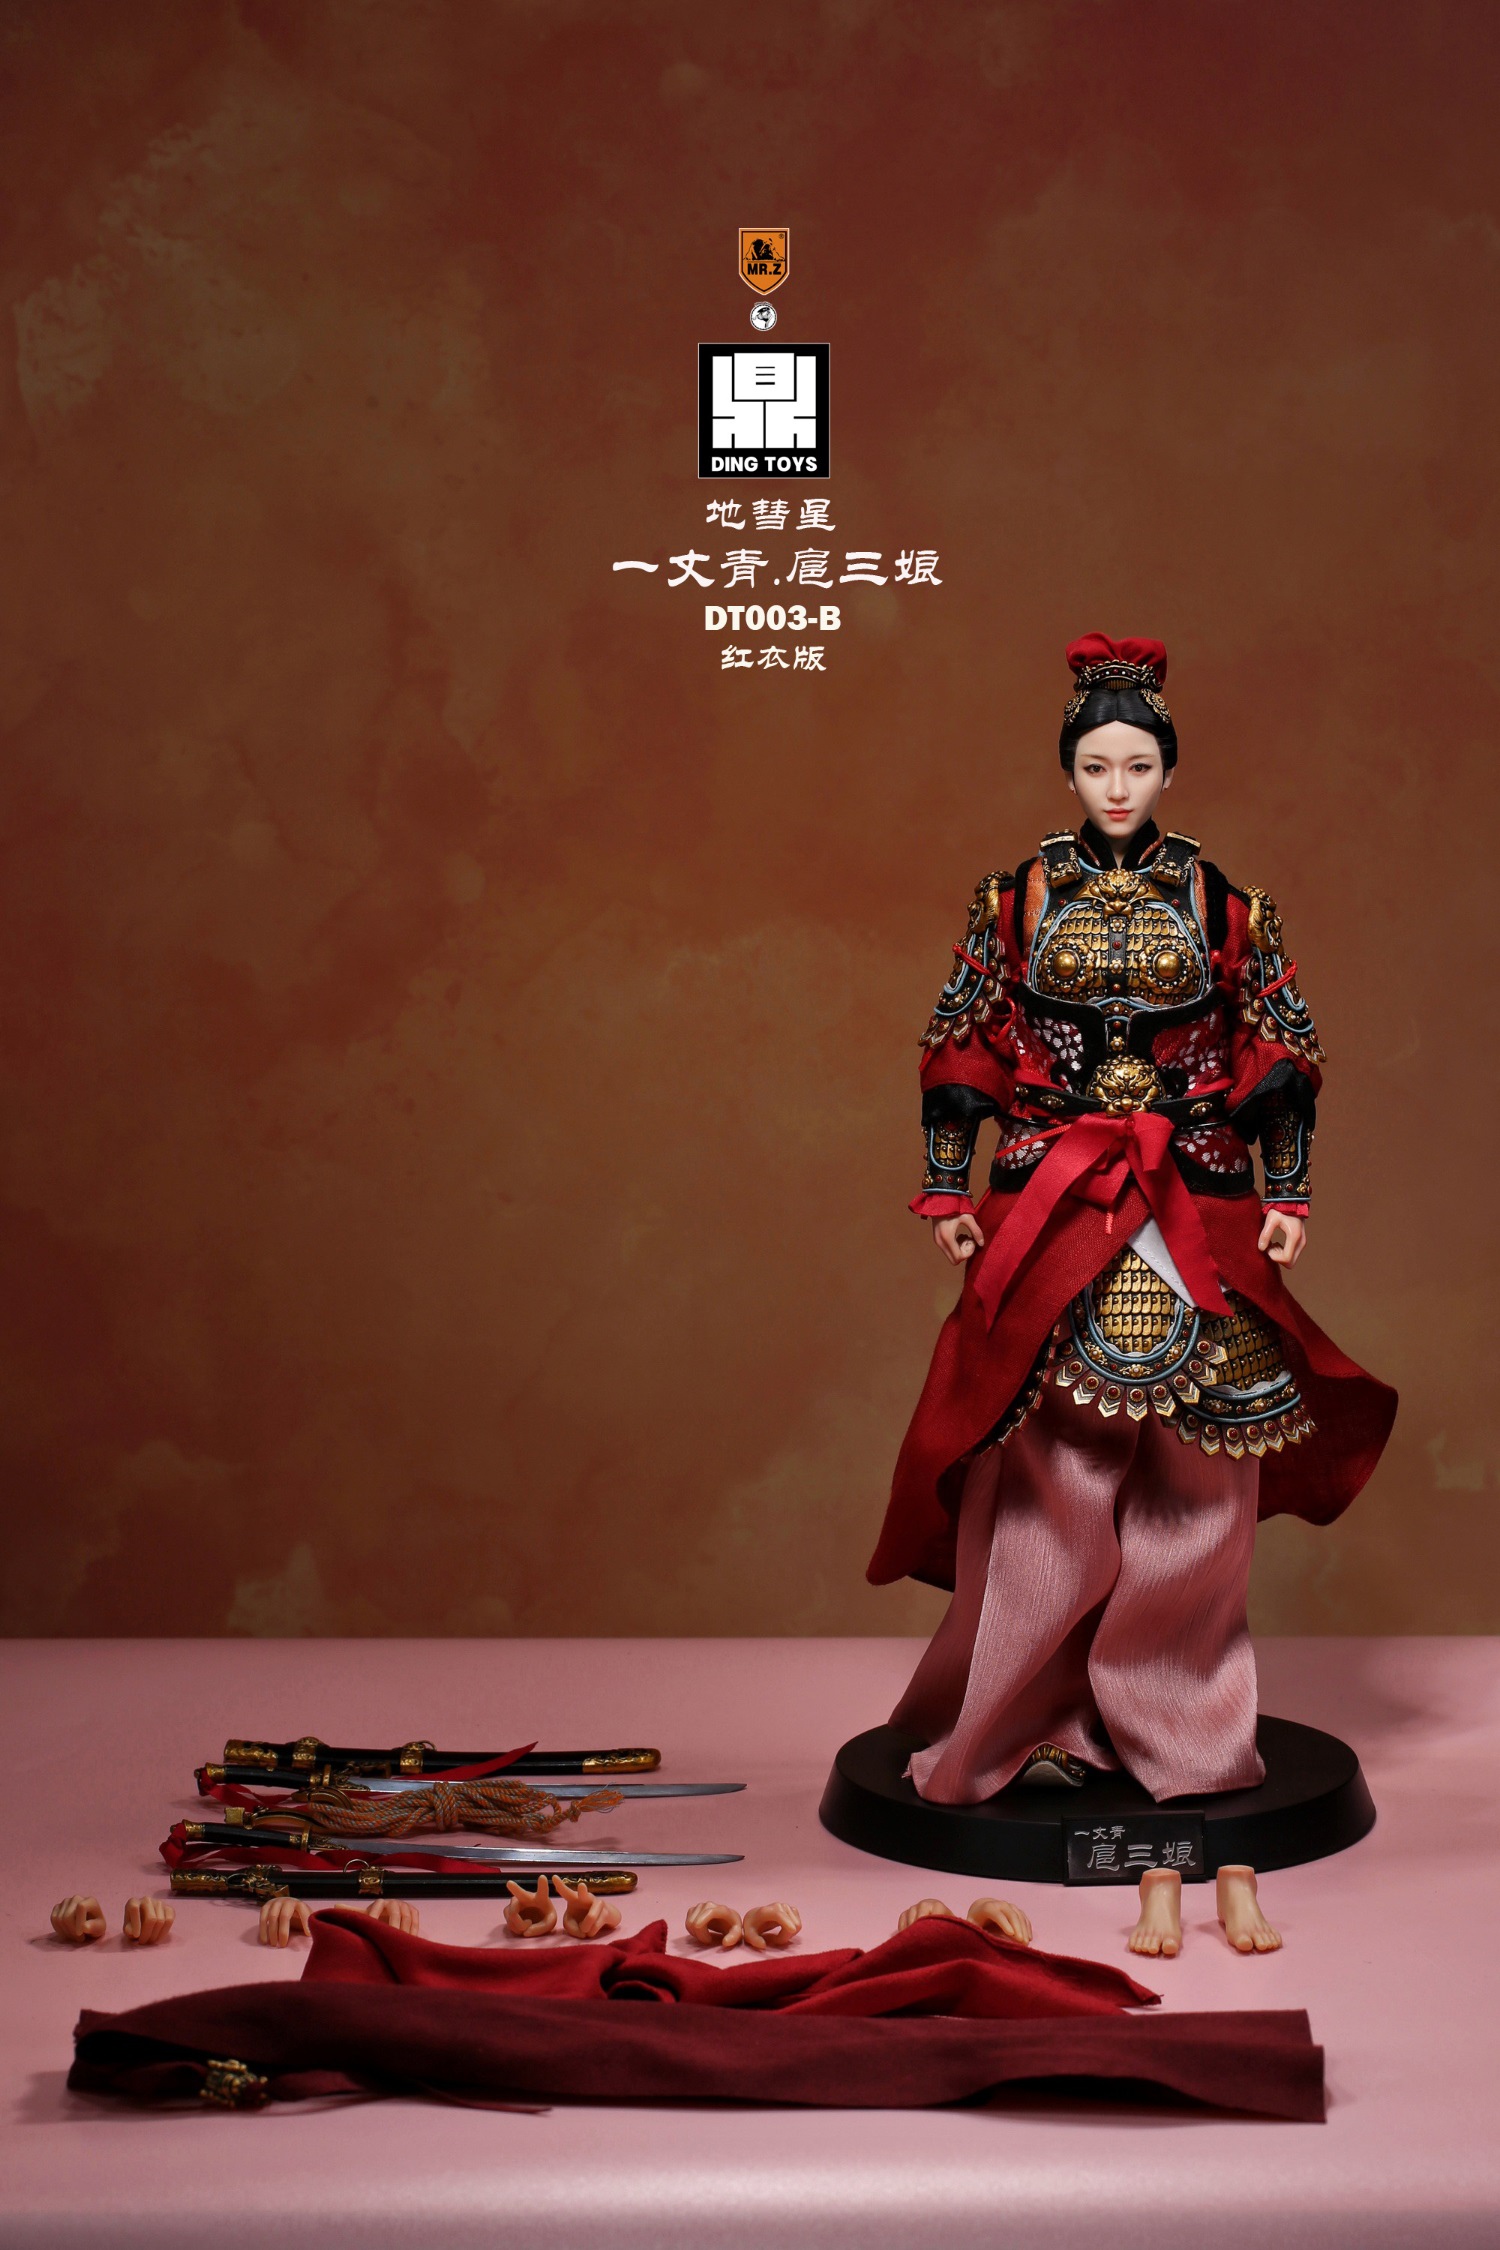 DingToys - NEW PRODUCT: Mr.Z x Ding Toys DT003 1/6 Scale 《Water Margin》Shiying Zhang (Green and Red versions), Horse (White) 4718